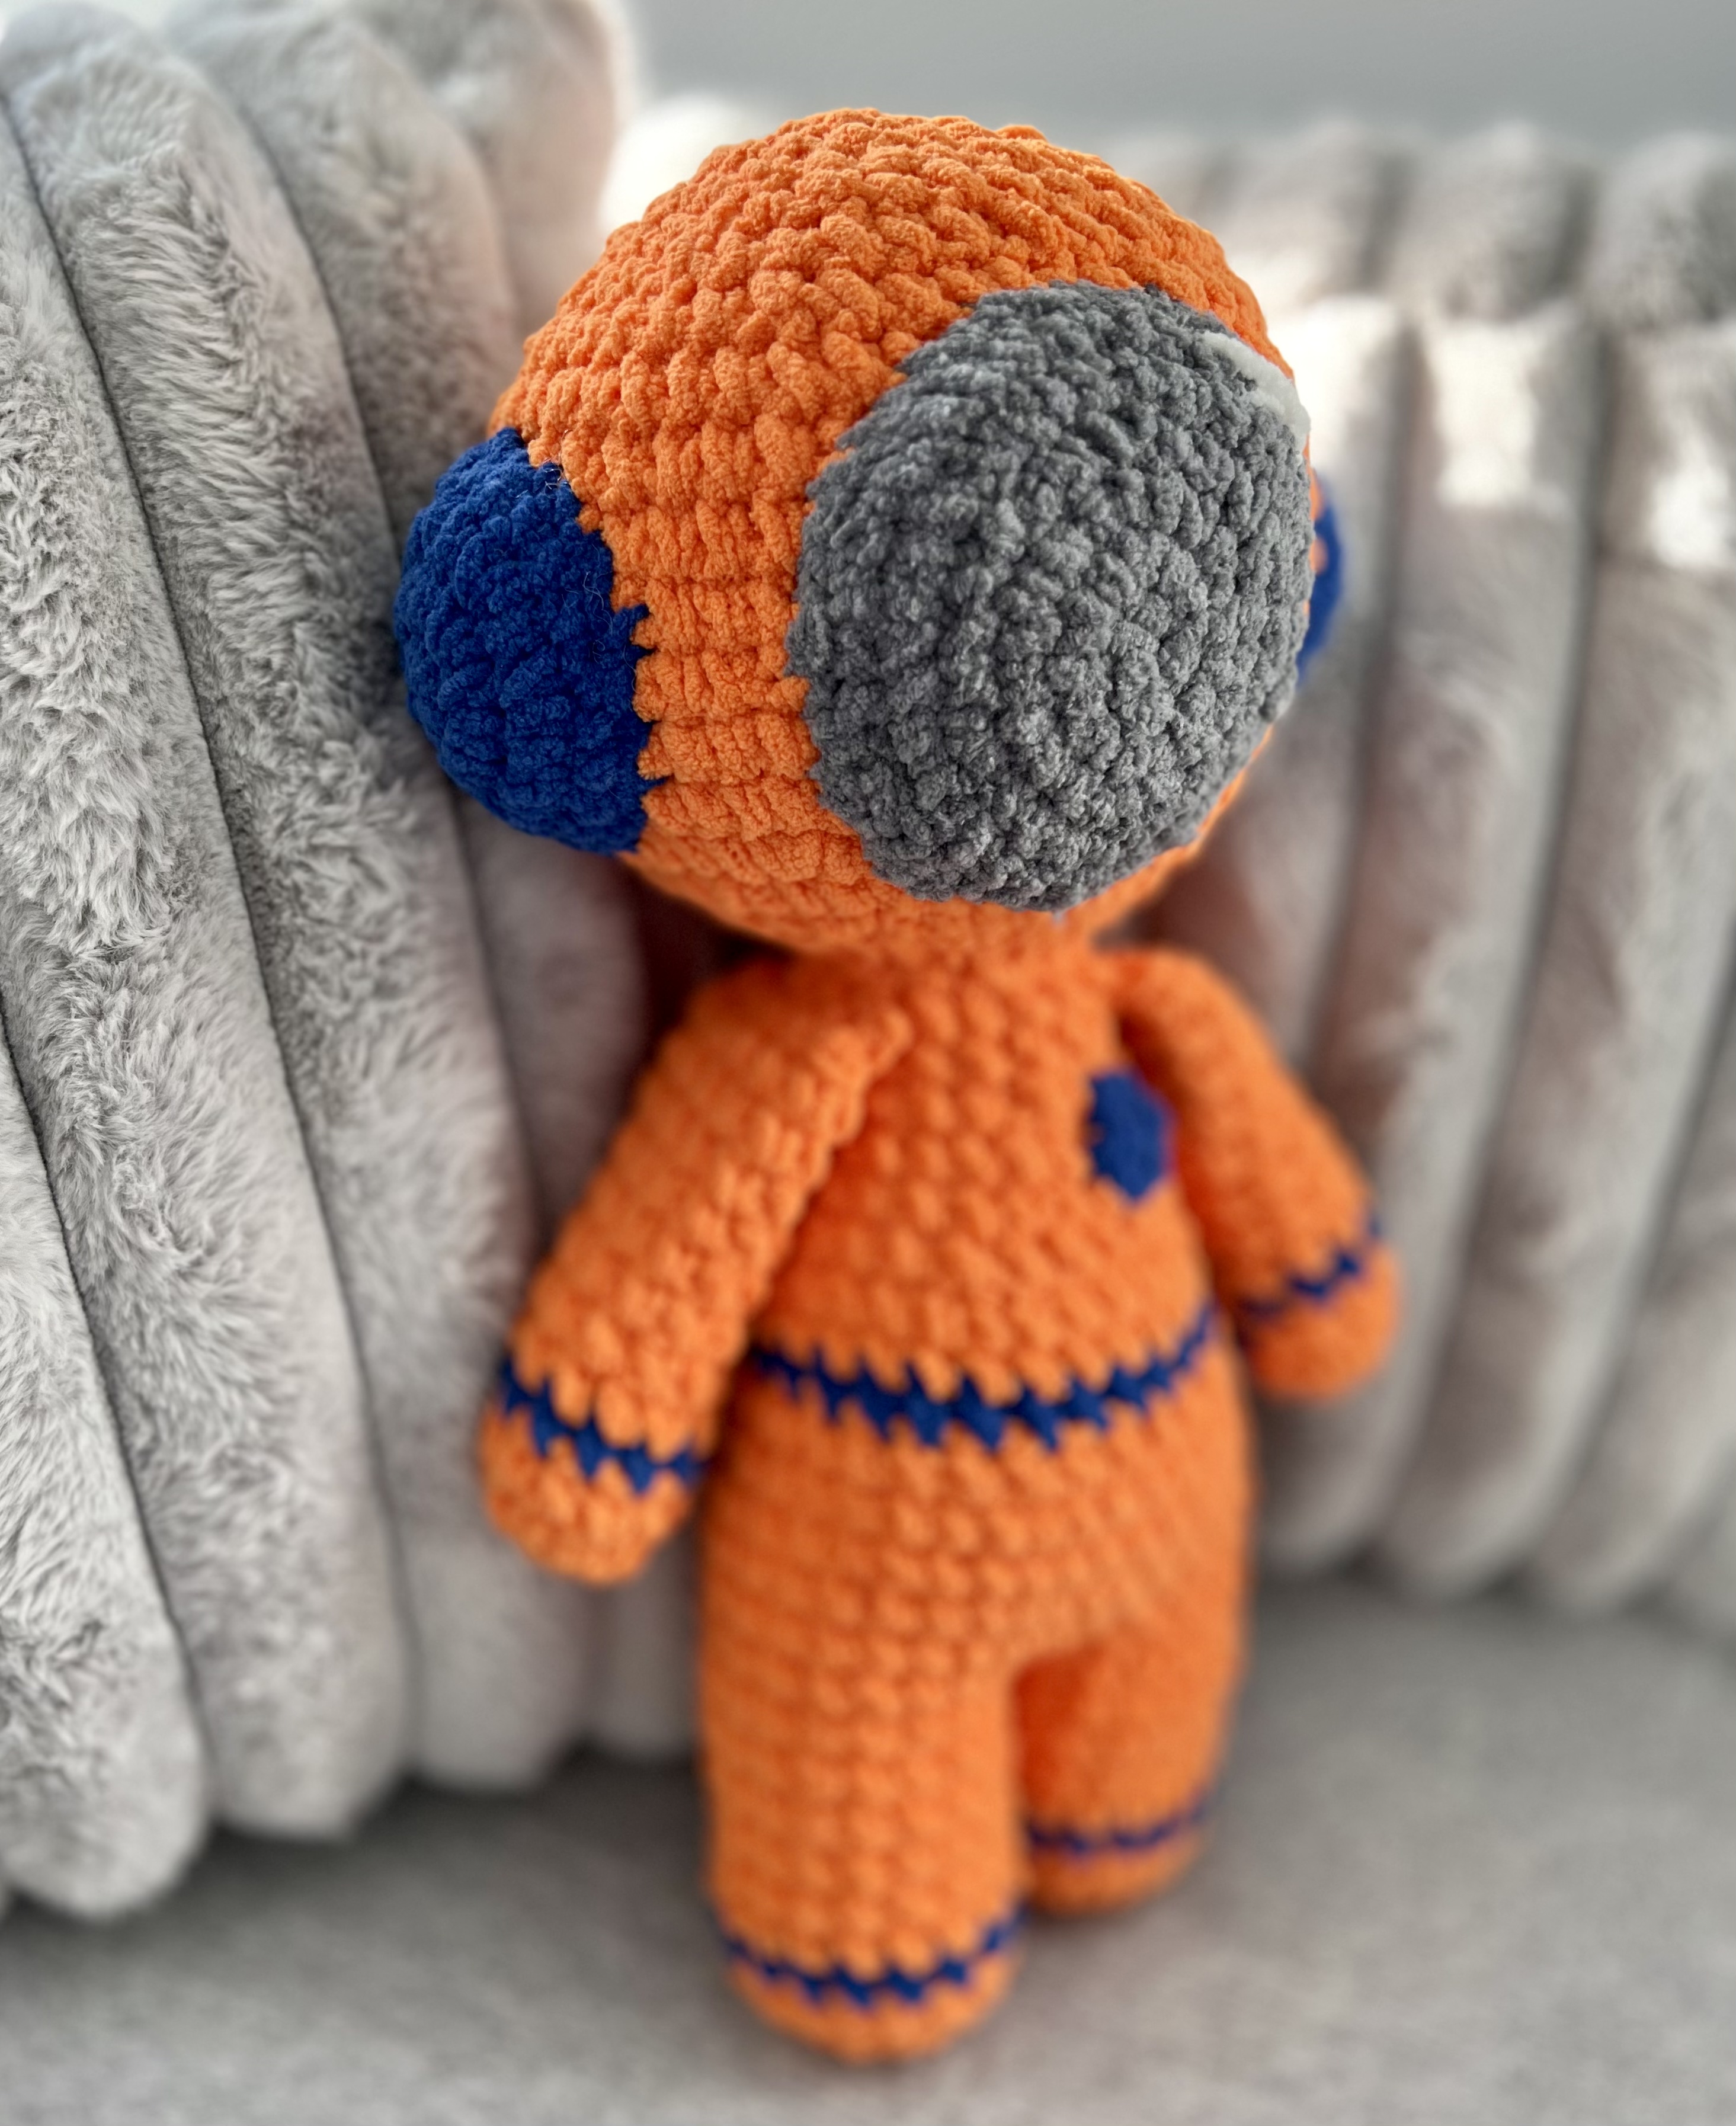 This Astronaut w/Orange Suit is made with love by Classy Crafty Wife! Shop more unique gift ideas today with Spots Initiatives, the best way to support creators.